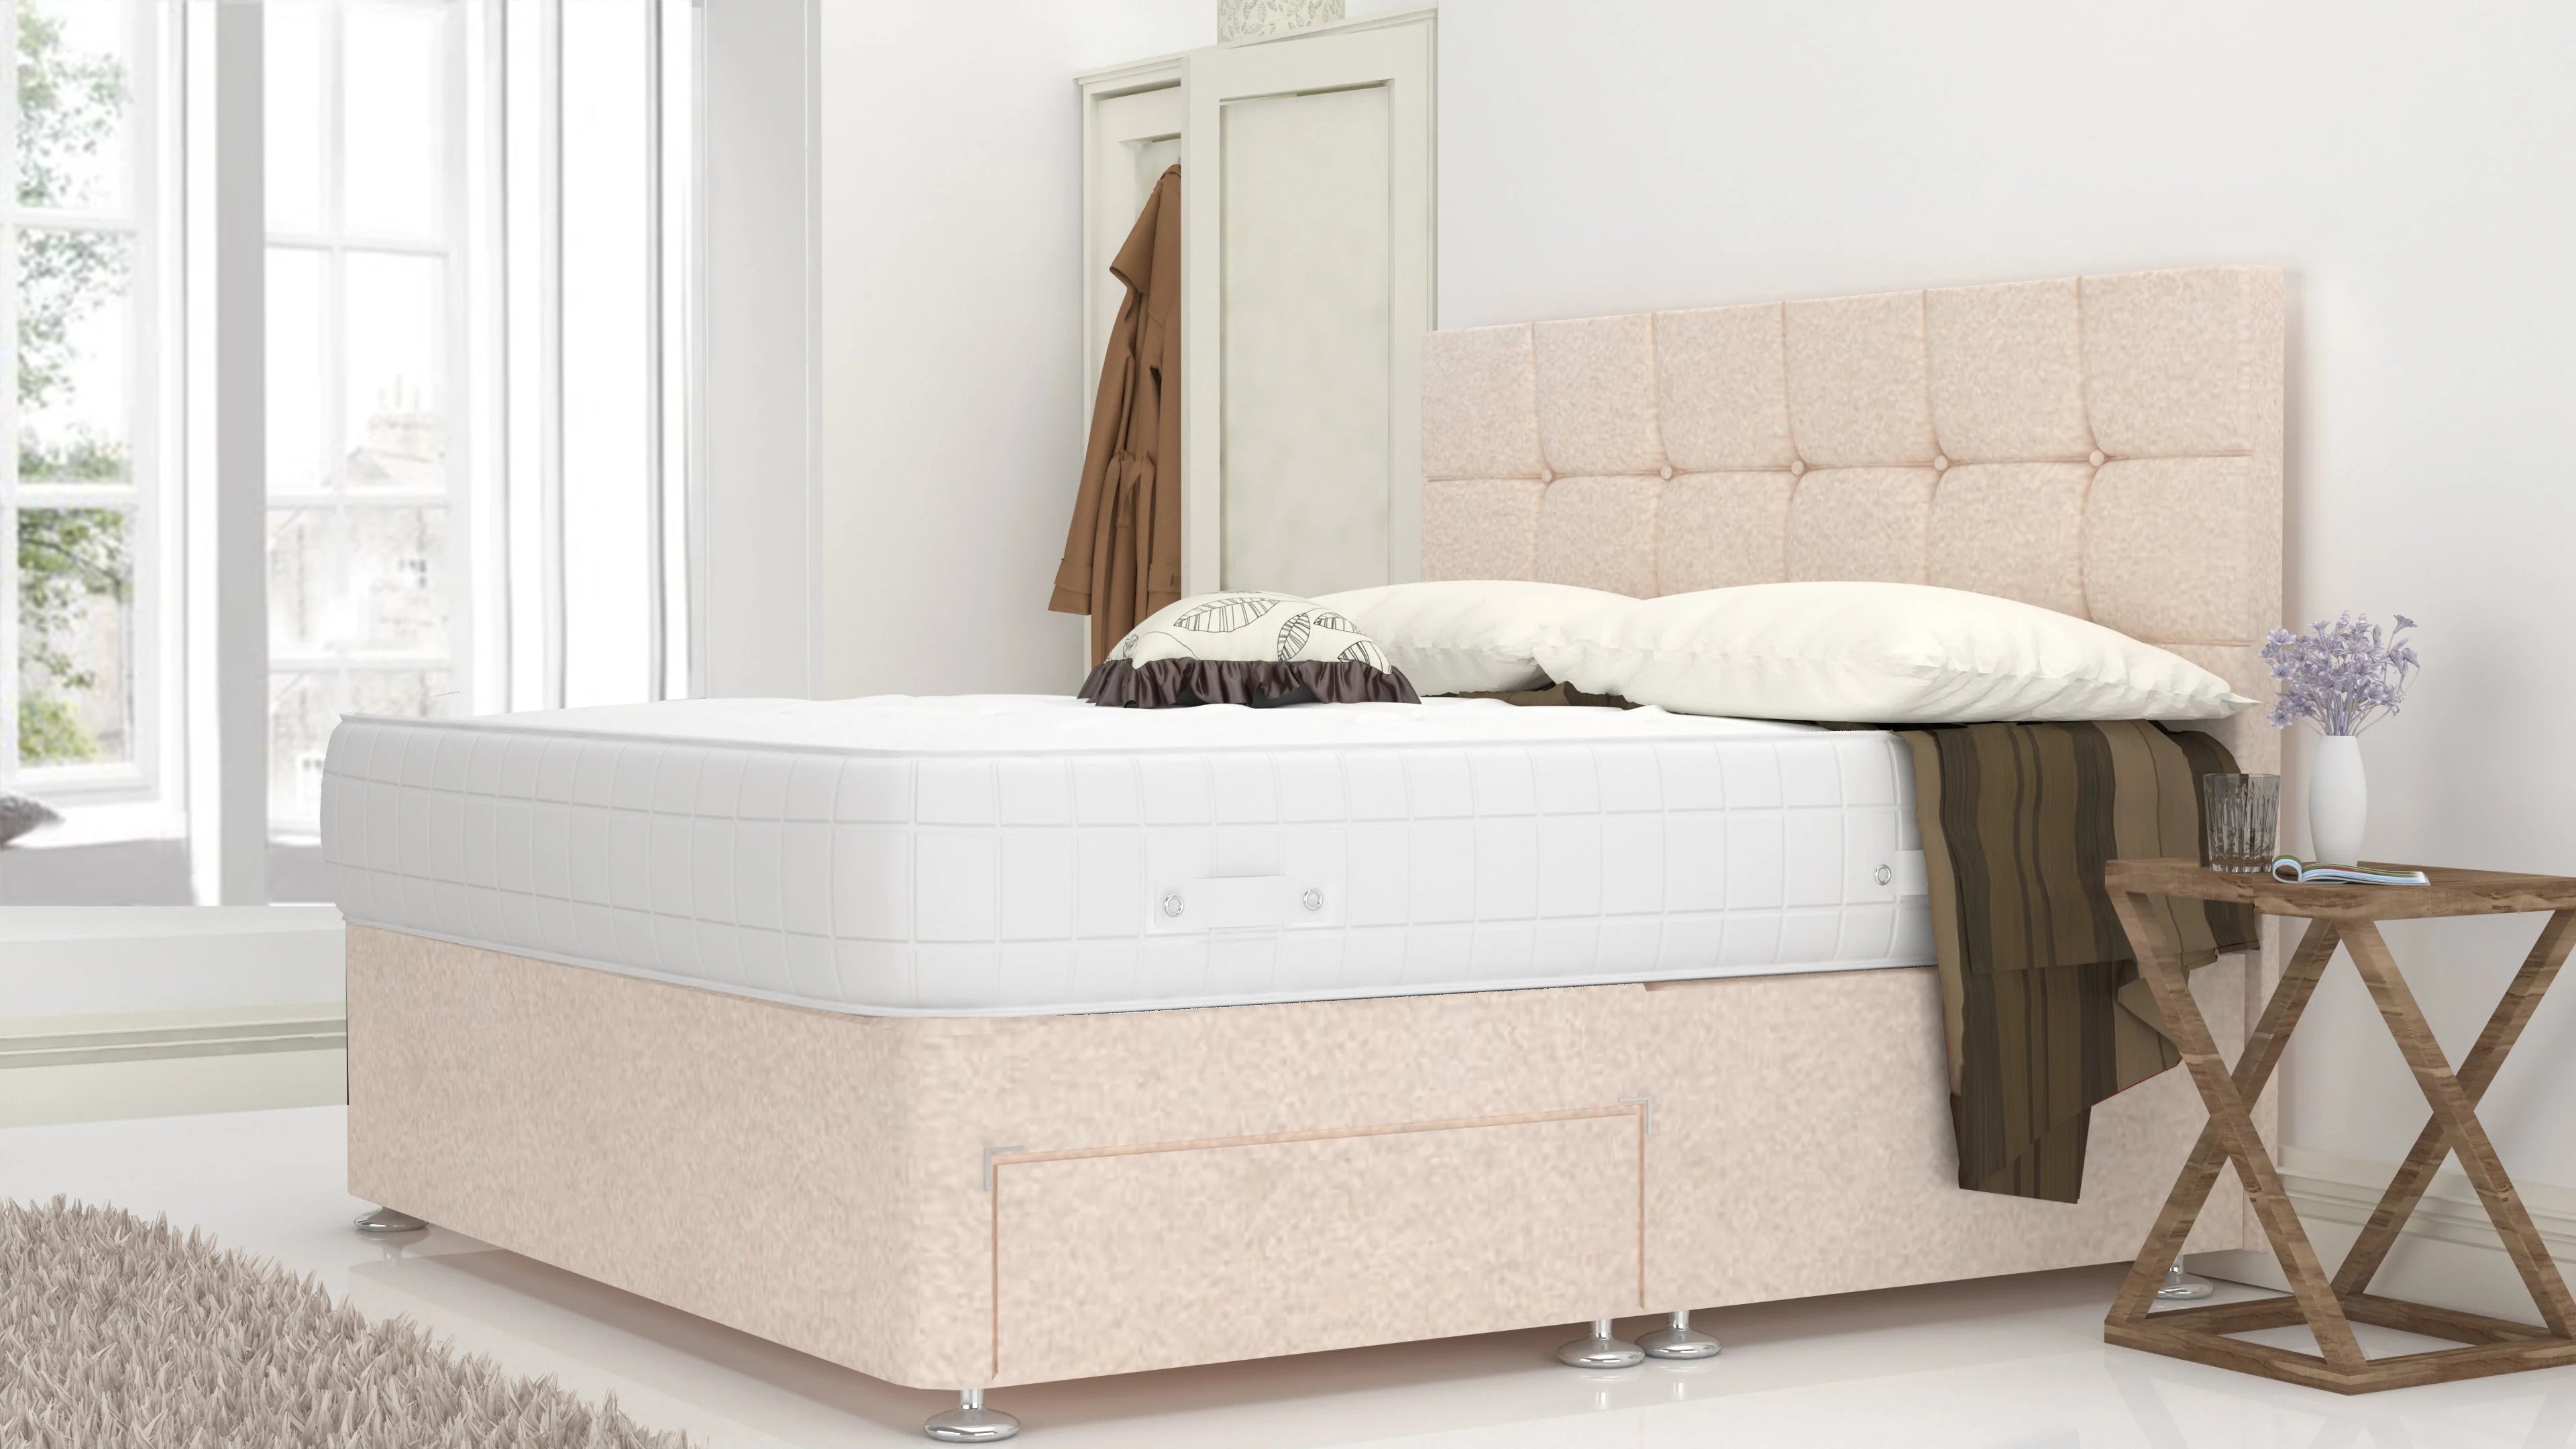 Cream Chanille 6 Feet Divan Bed Set With 4 Panel Headboard (Included Feet) And Free Tinsel Top Mattress